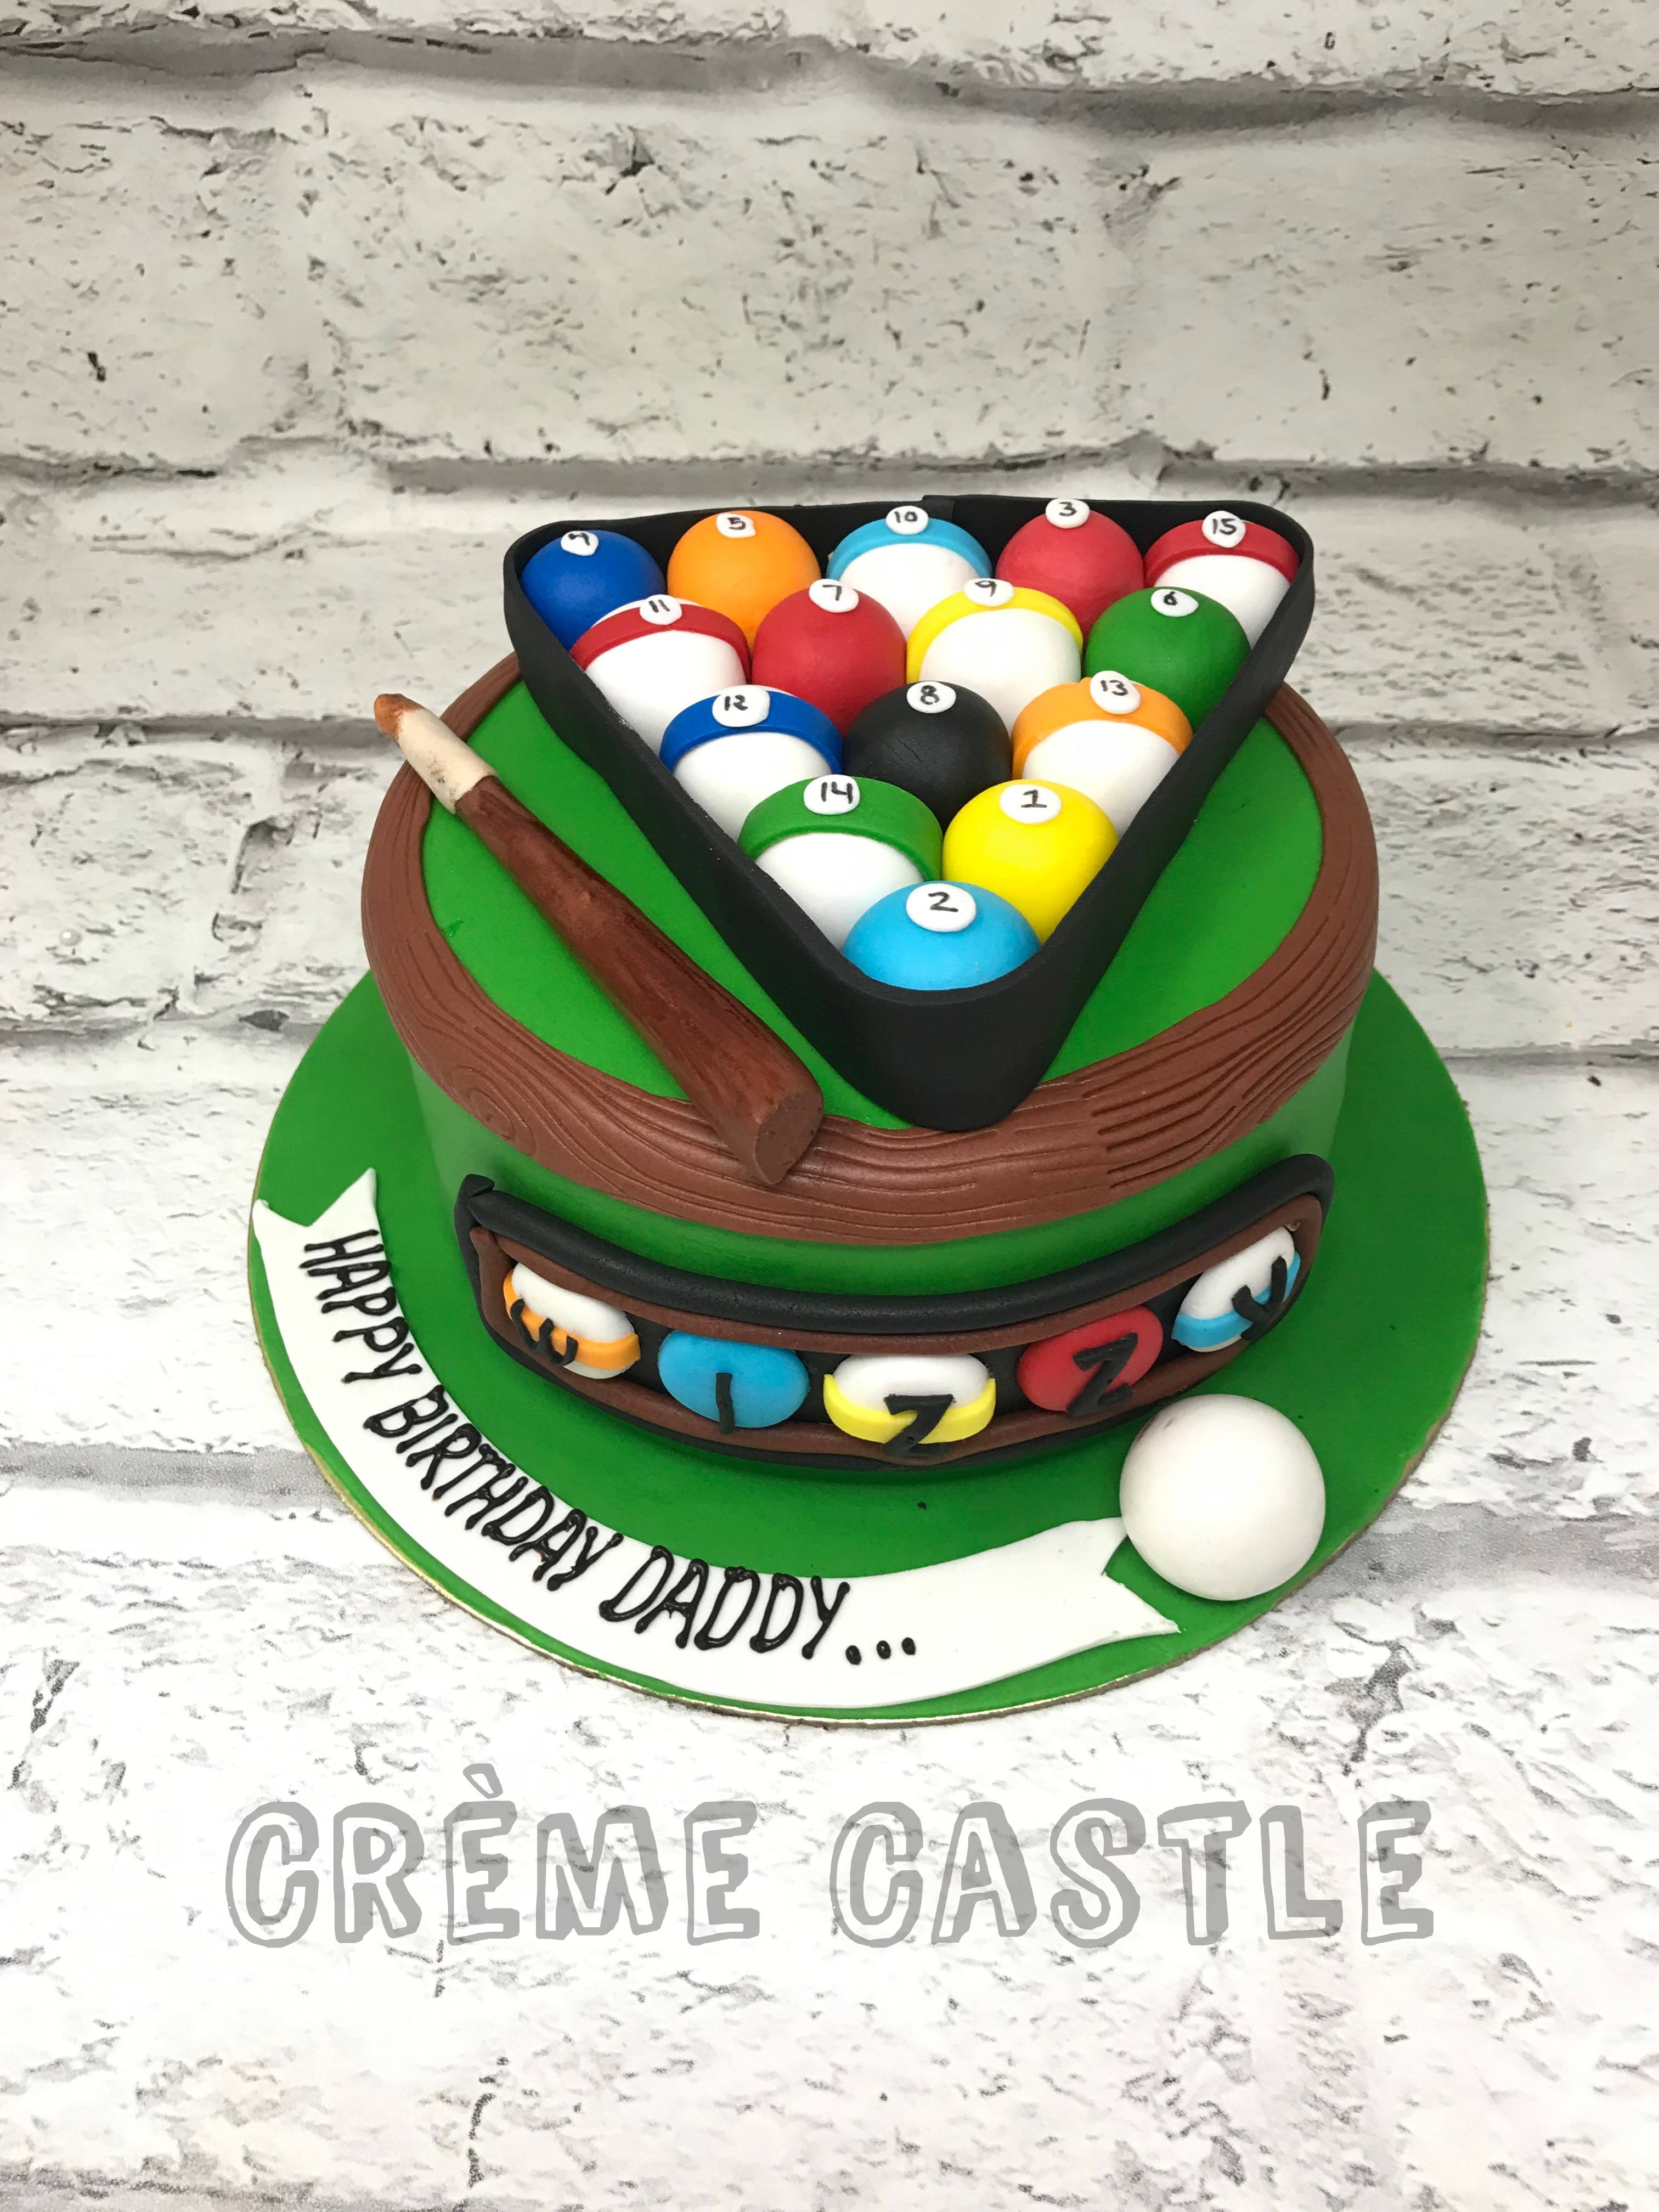 Snooker cake I made for my nephew : r/Baking